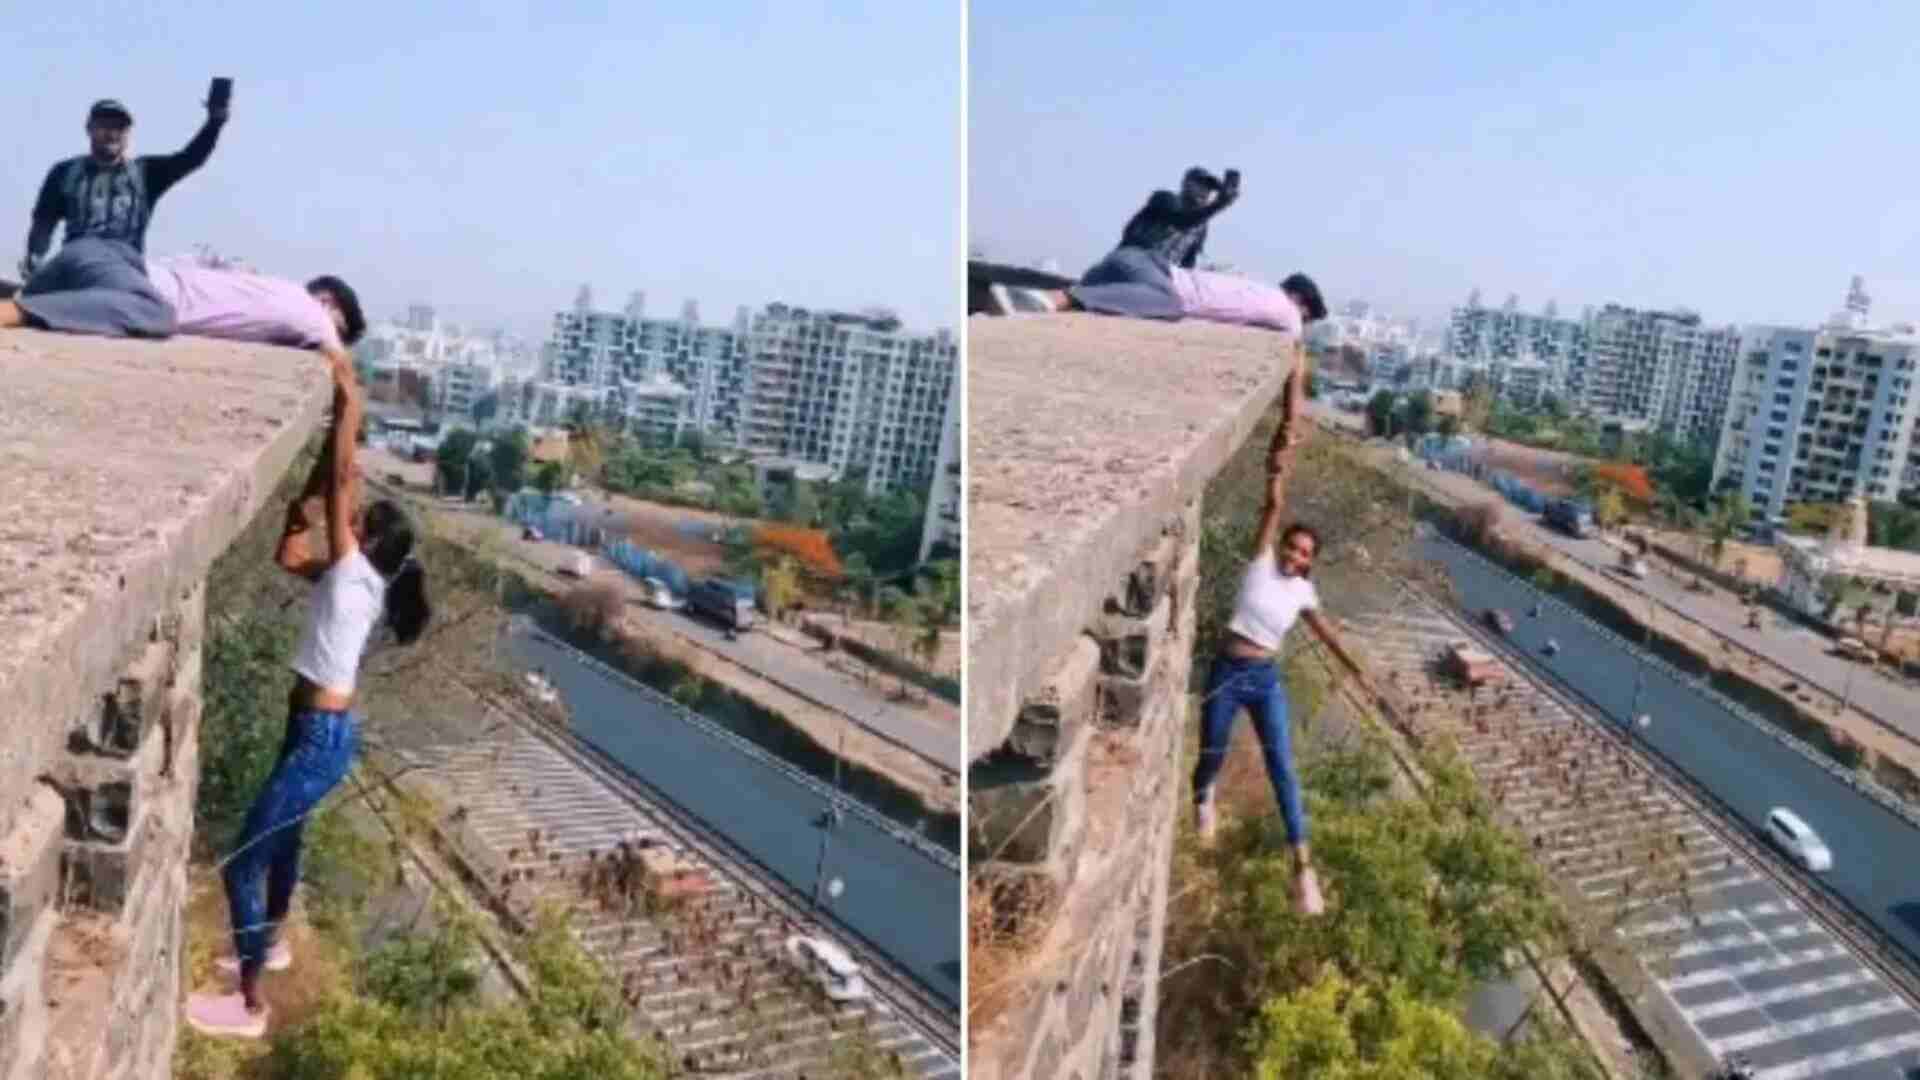 Watch: Pune Youngsters Preform Reckless Stunt To Film Instagram Reel